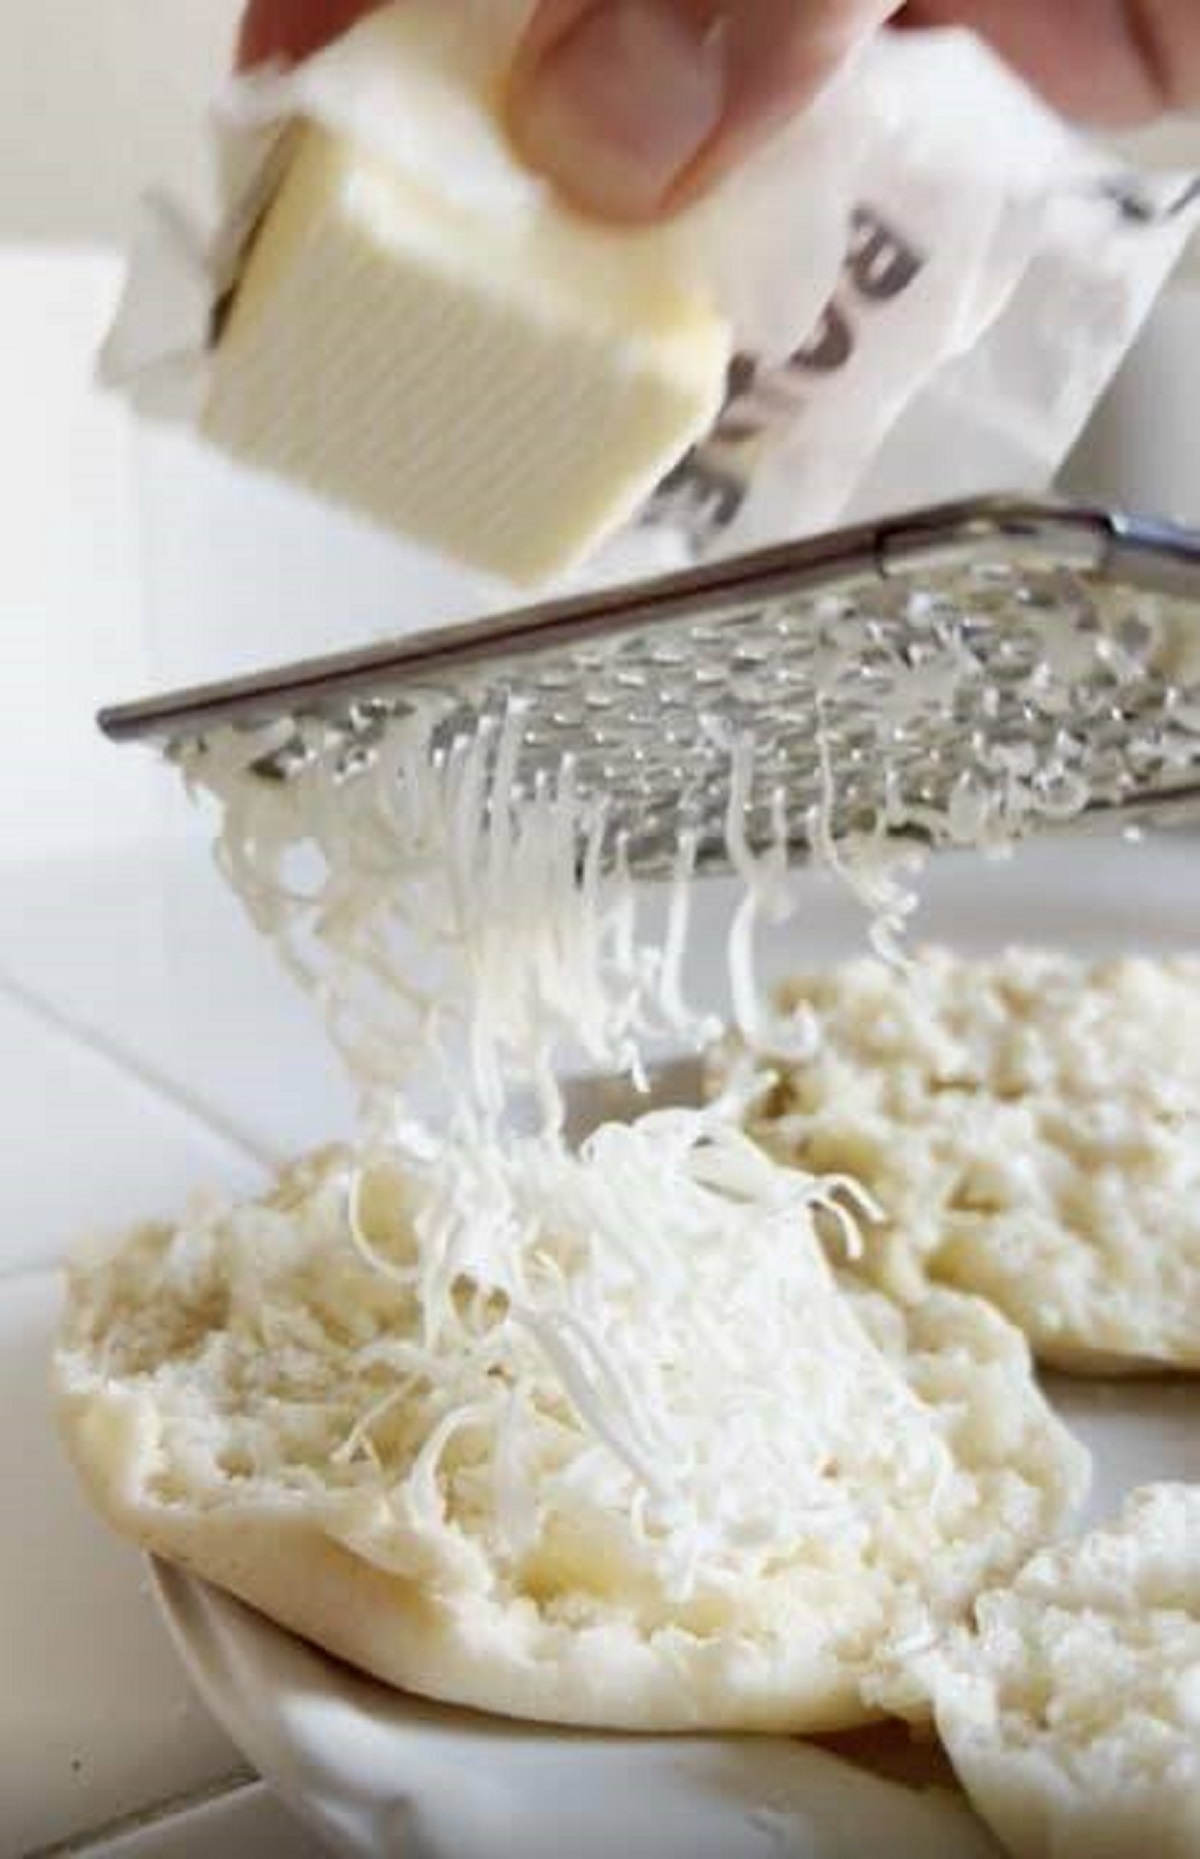 "Use a cheese grater when you need to spread cold butter on cold things or in pie dough."